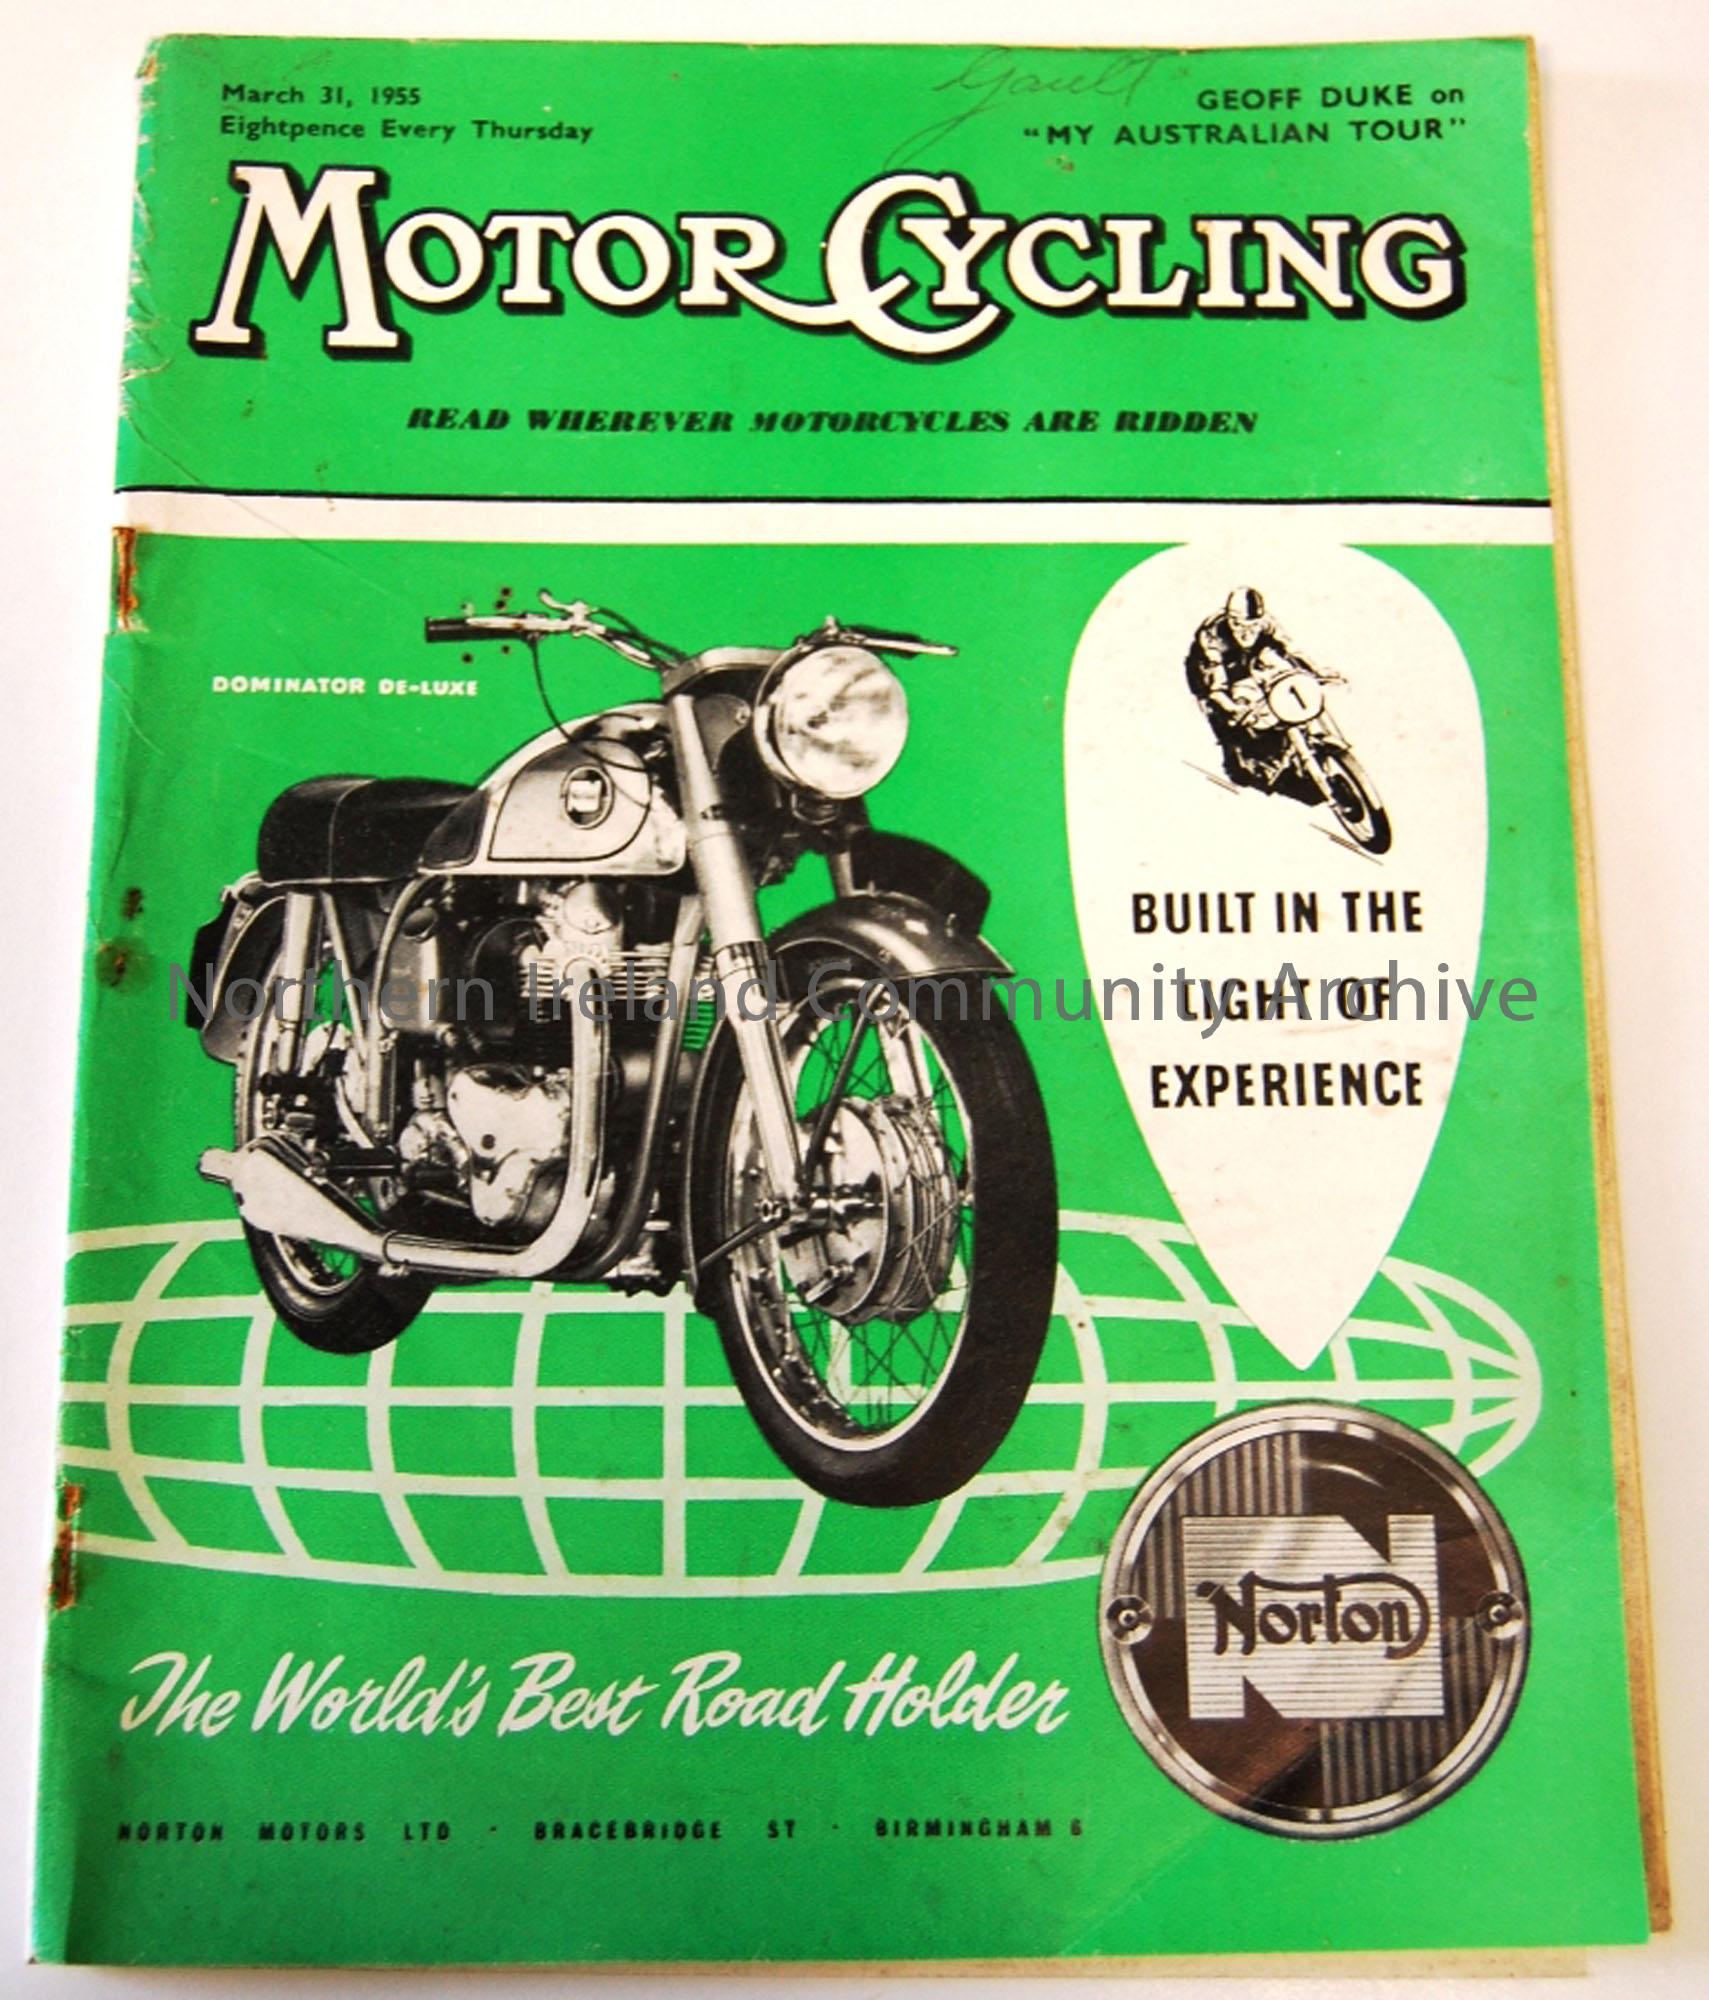 Motor cycling, read wherever motorcyclists are ridden- March 31, 1955